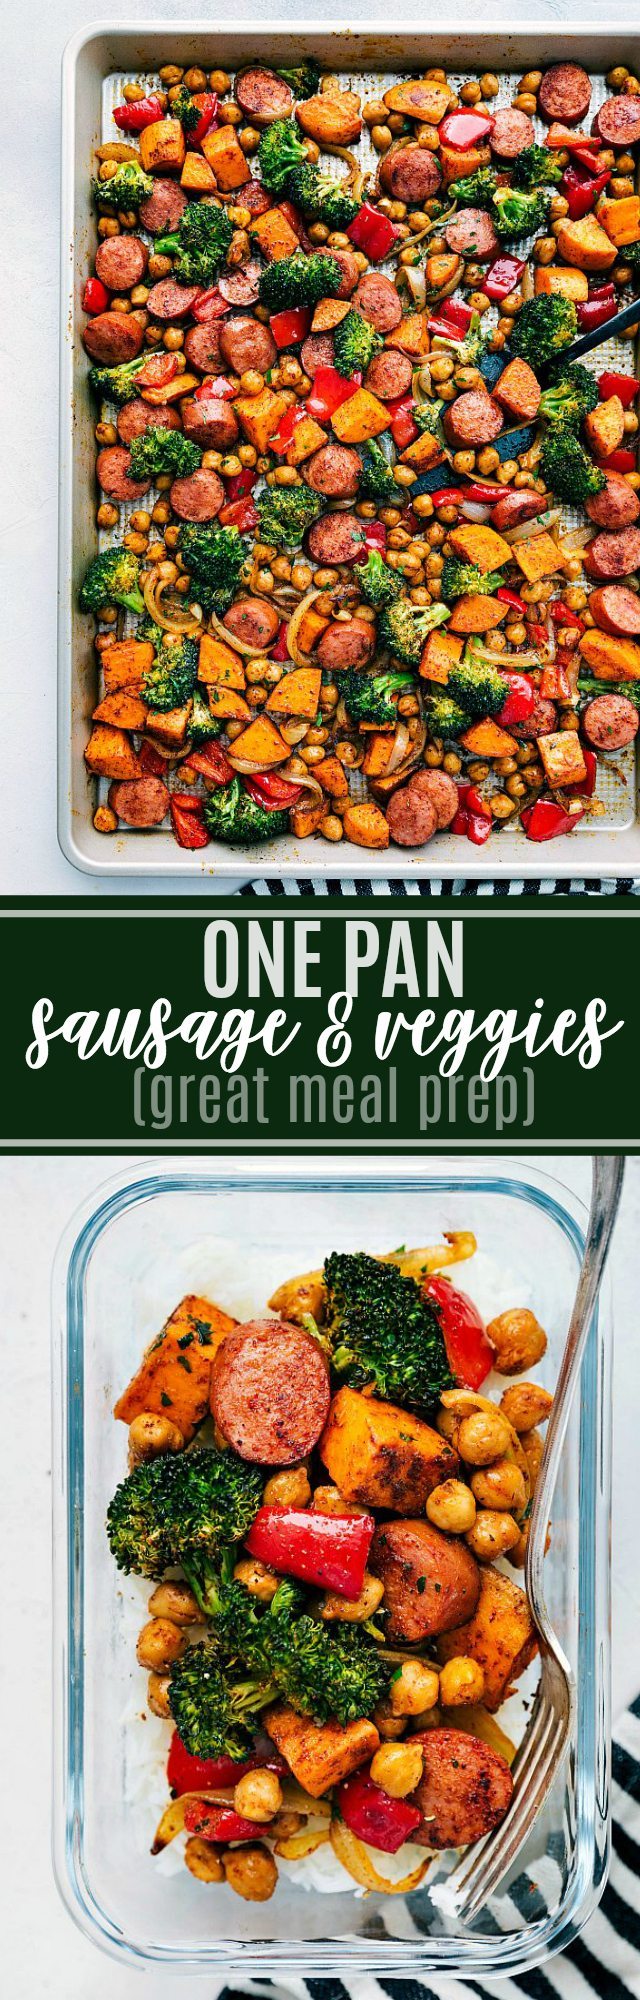 ONE PAN HEALTHY SAUSAGE AND VEGGIES | chelseasmessyapron.com | #sausage #veggies #onepan #easy #quick #fast #cleanup #minimal #chickpeas #sausage #broccoli #red pepper #onion #family #friendly #kid #meal #prep #healthy #simple #whole30